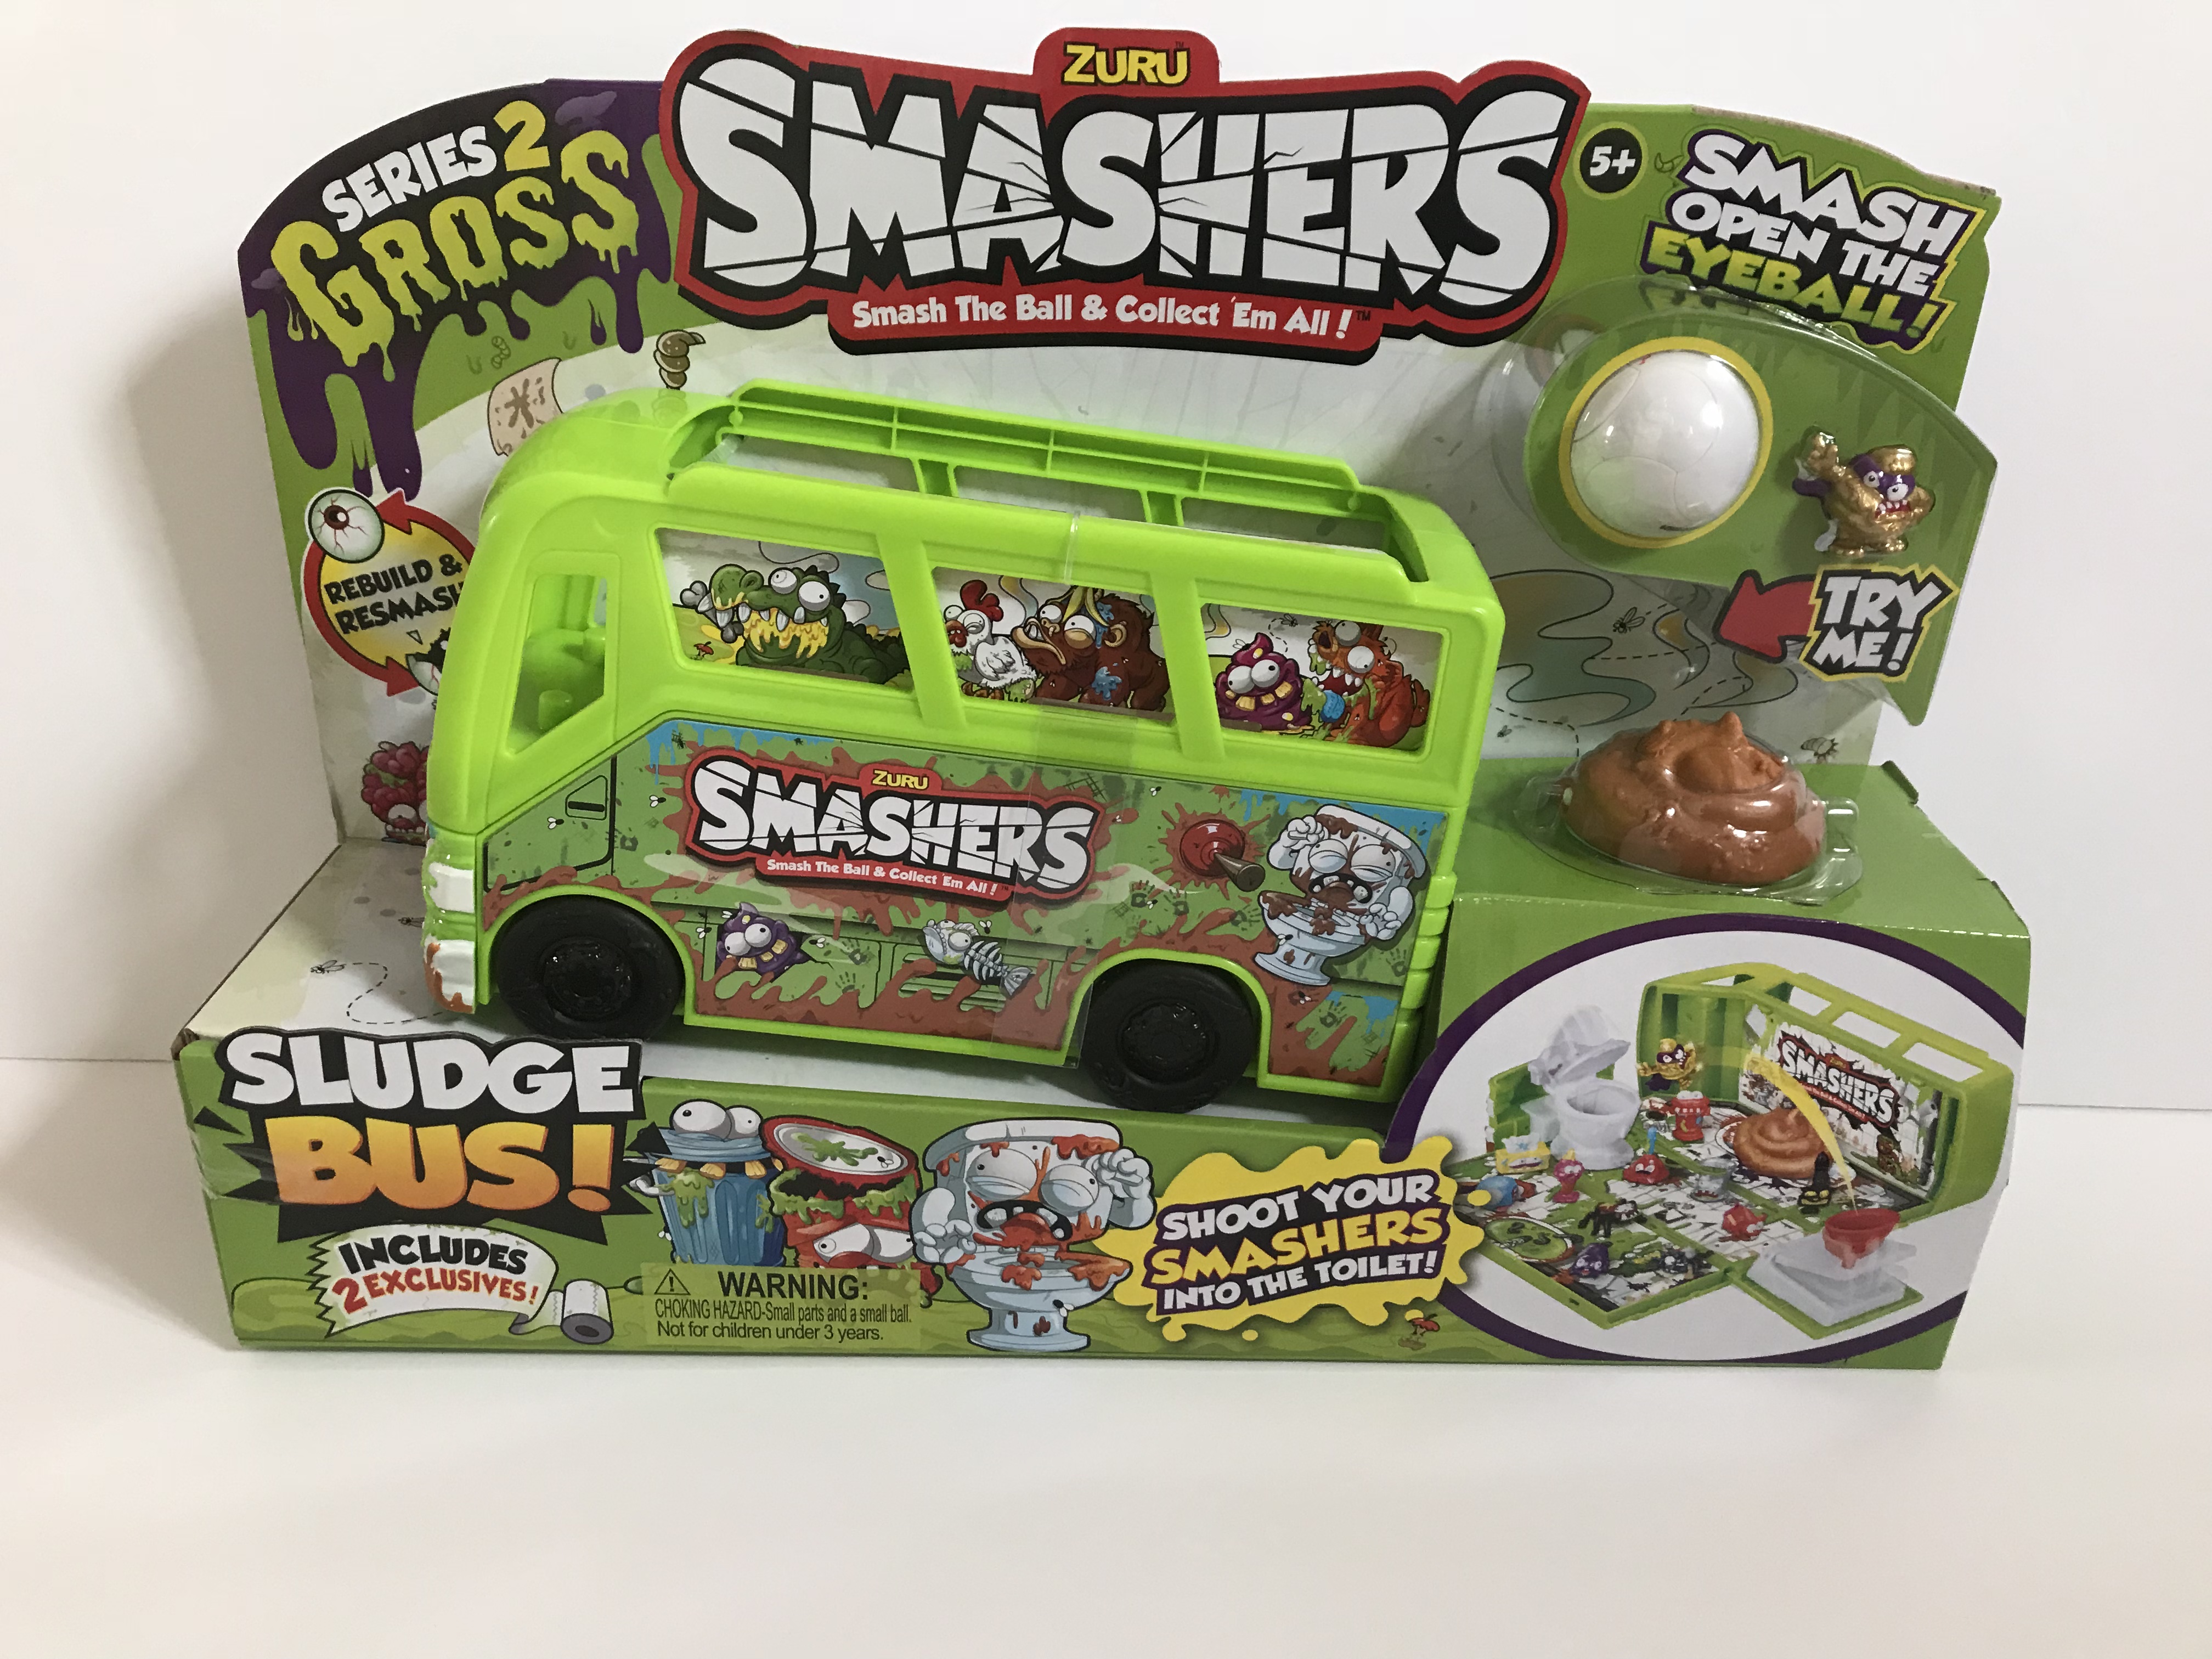 Have A Happy Halloween With The Latest Zuru Smashers Gross Series 2 Sludge Bus & Smashers Packs